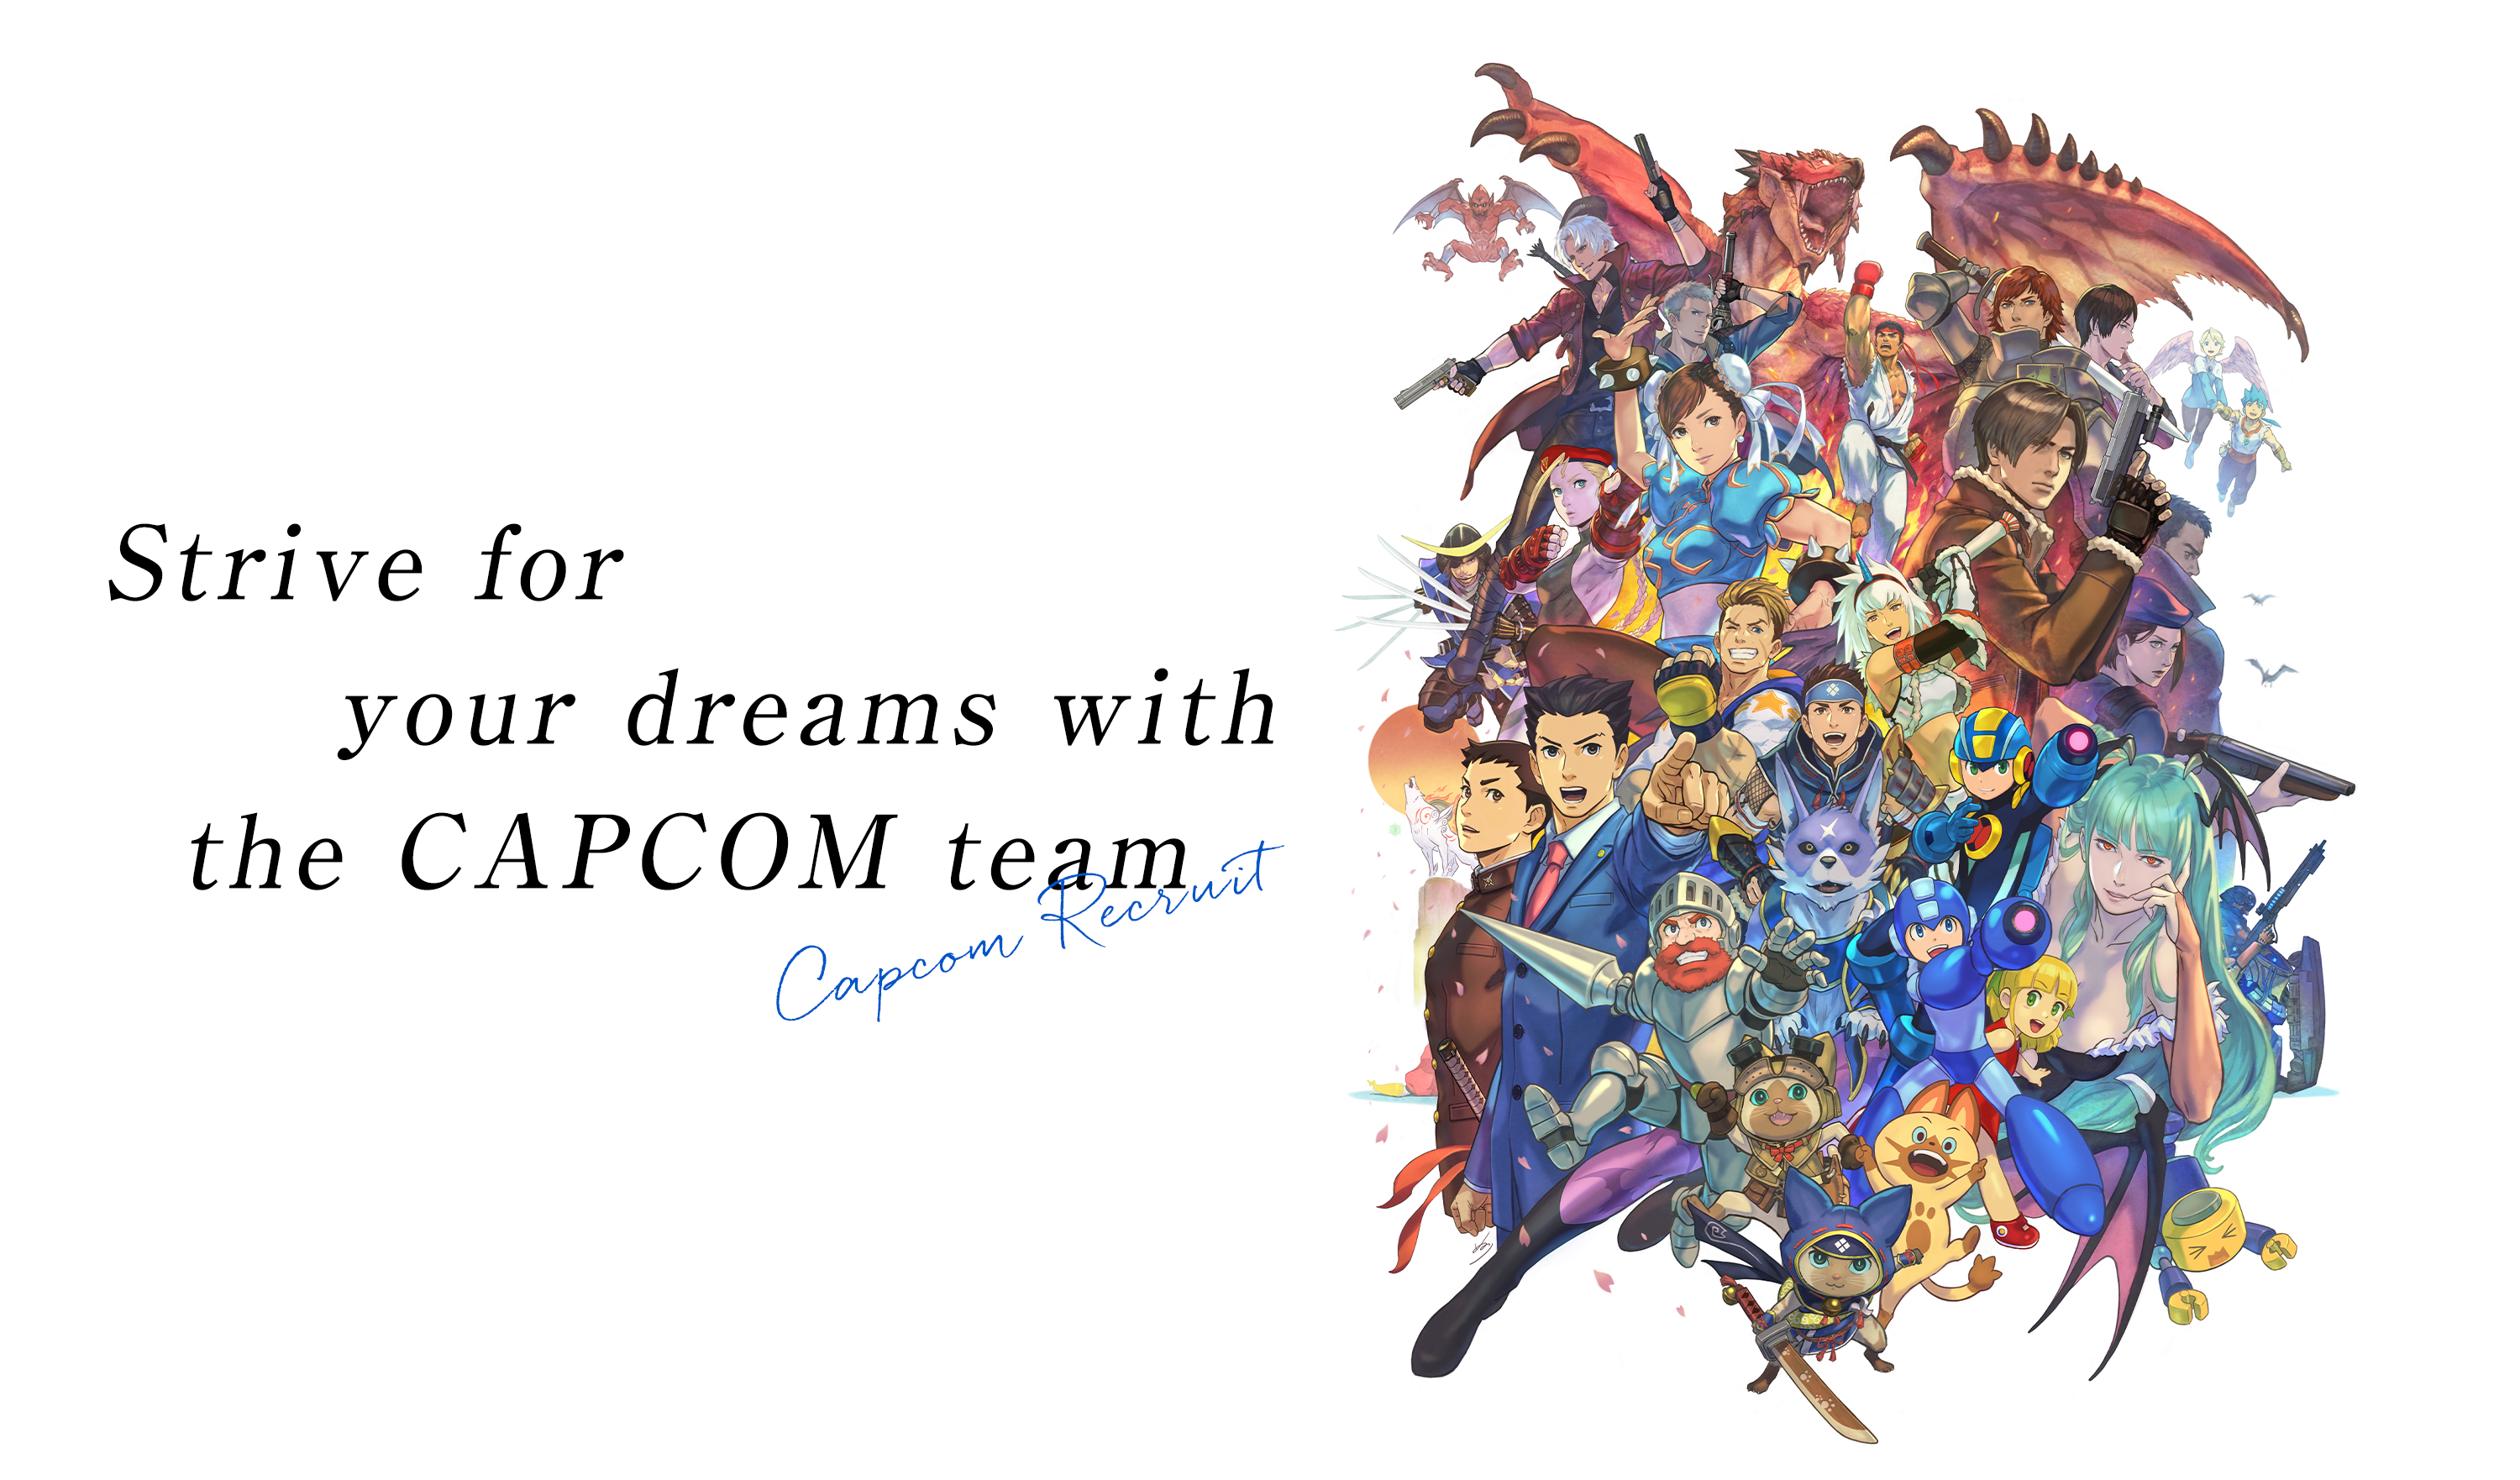 Strive for your dreams with the CAPCOM team